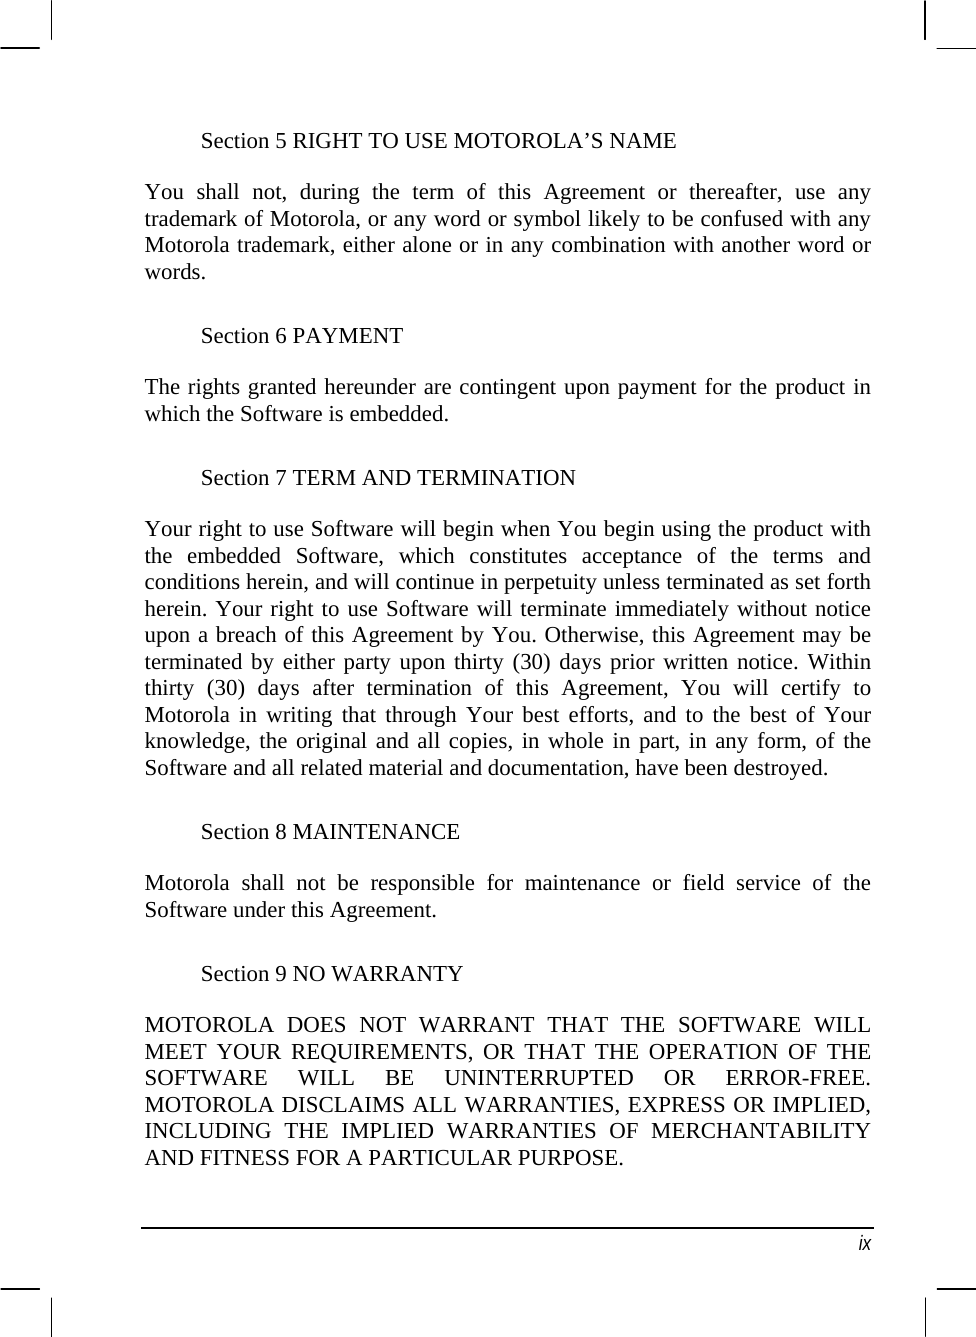  Section 5 RIGHT TO USE MOTOROLA’S NAME You shall not, during the term of this Agreement or thereafter, use any trademark of Motorola, or any word or symbol likely to be confused with any Motorola trademark, either alone or in any combination with another word or words. Section 6 PAYMENT The rights granted hereunder are contingent upon payment for the product in which the Software is embedded. Section 7 TERM AND TERMINATION Your right to use Software will begin when You begin using the product with the embedded Software, which constitutes acceptance of the terms and conditions herein, and will continue in perpetuity unless terminated as set forth herein. Your right to use Software will terminate immediately without notice upon a breach of this Agreement by You. Otherwise, this Agreement may be terminated by either party upon thirty (30) days prior written notice. Within thirty (30) days after termination of this Agreement, You will certify to Motorola in writing that through Your best efforts, and to the best of Your knowledge, the original and all copies, in whole in part, in any form, of the Software and all related material and documentation, have been destroyed. Section 8 MAINTENANCE Motorola shall not be responsible for maintenance or field service of the Software under this Agreement. Section 9 NO WARRANTY MOTOROLA DOES NOT WARRANT THAT THE SOFTWARE WILL MEET YOUR REQUIREMENTS, OR THAT THE OPERATION OF THE SOFTWARE WILL BE UNINTERRUPTED OR ERROR-FREE. MOTOROLA DISCLAIMS ALL WARRANTIES, EXPRESS OR IMPLIED, INCLUDING THE IMPLIED WARRANTIES OF MERCHANTABILITY AND FITNESS FOR A PARTICULAR PURPOSE.  ix 